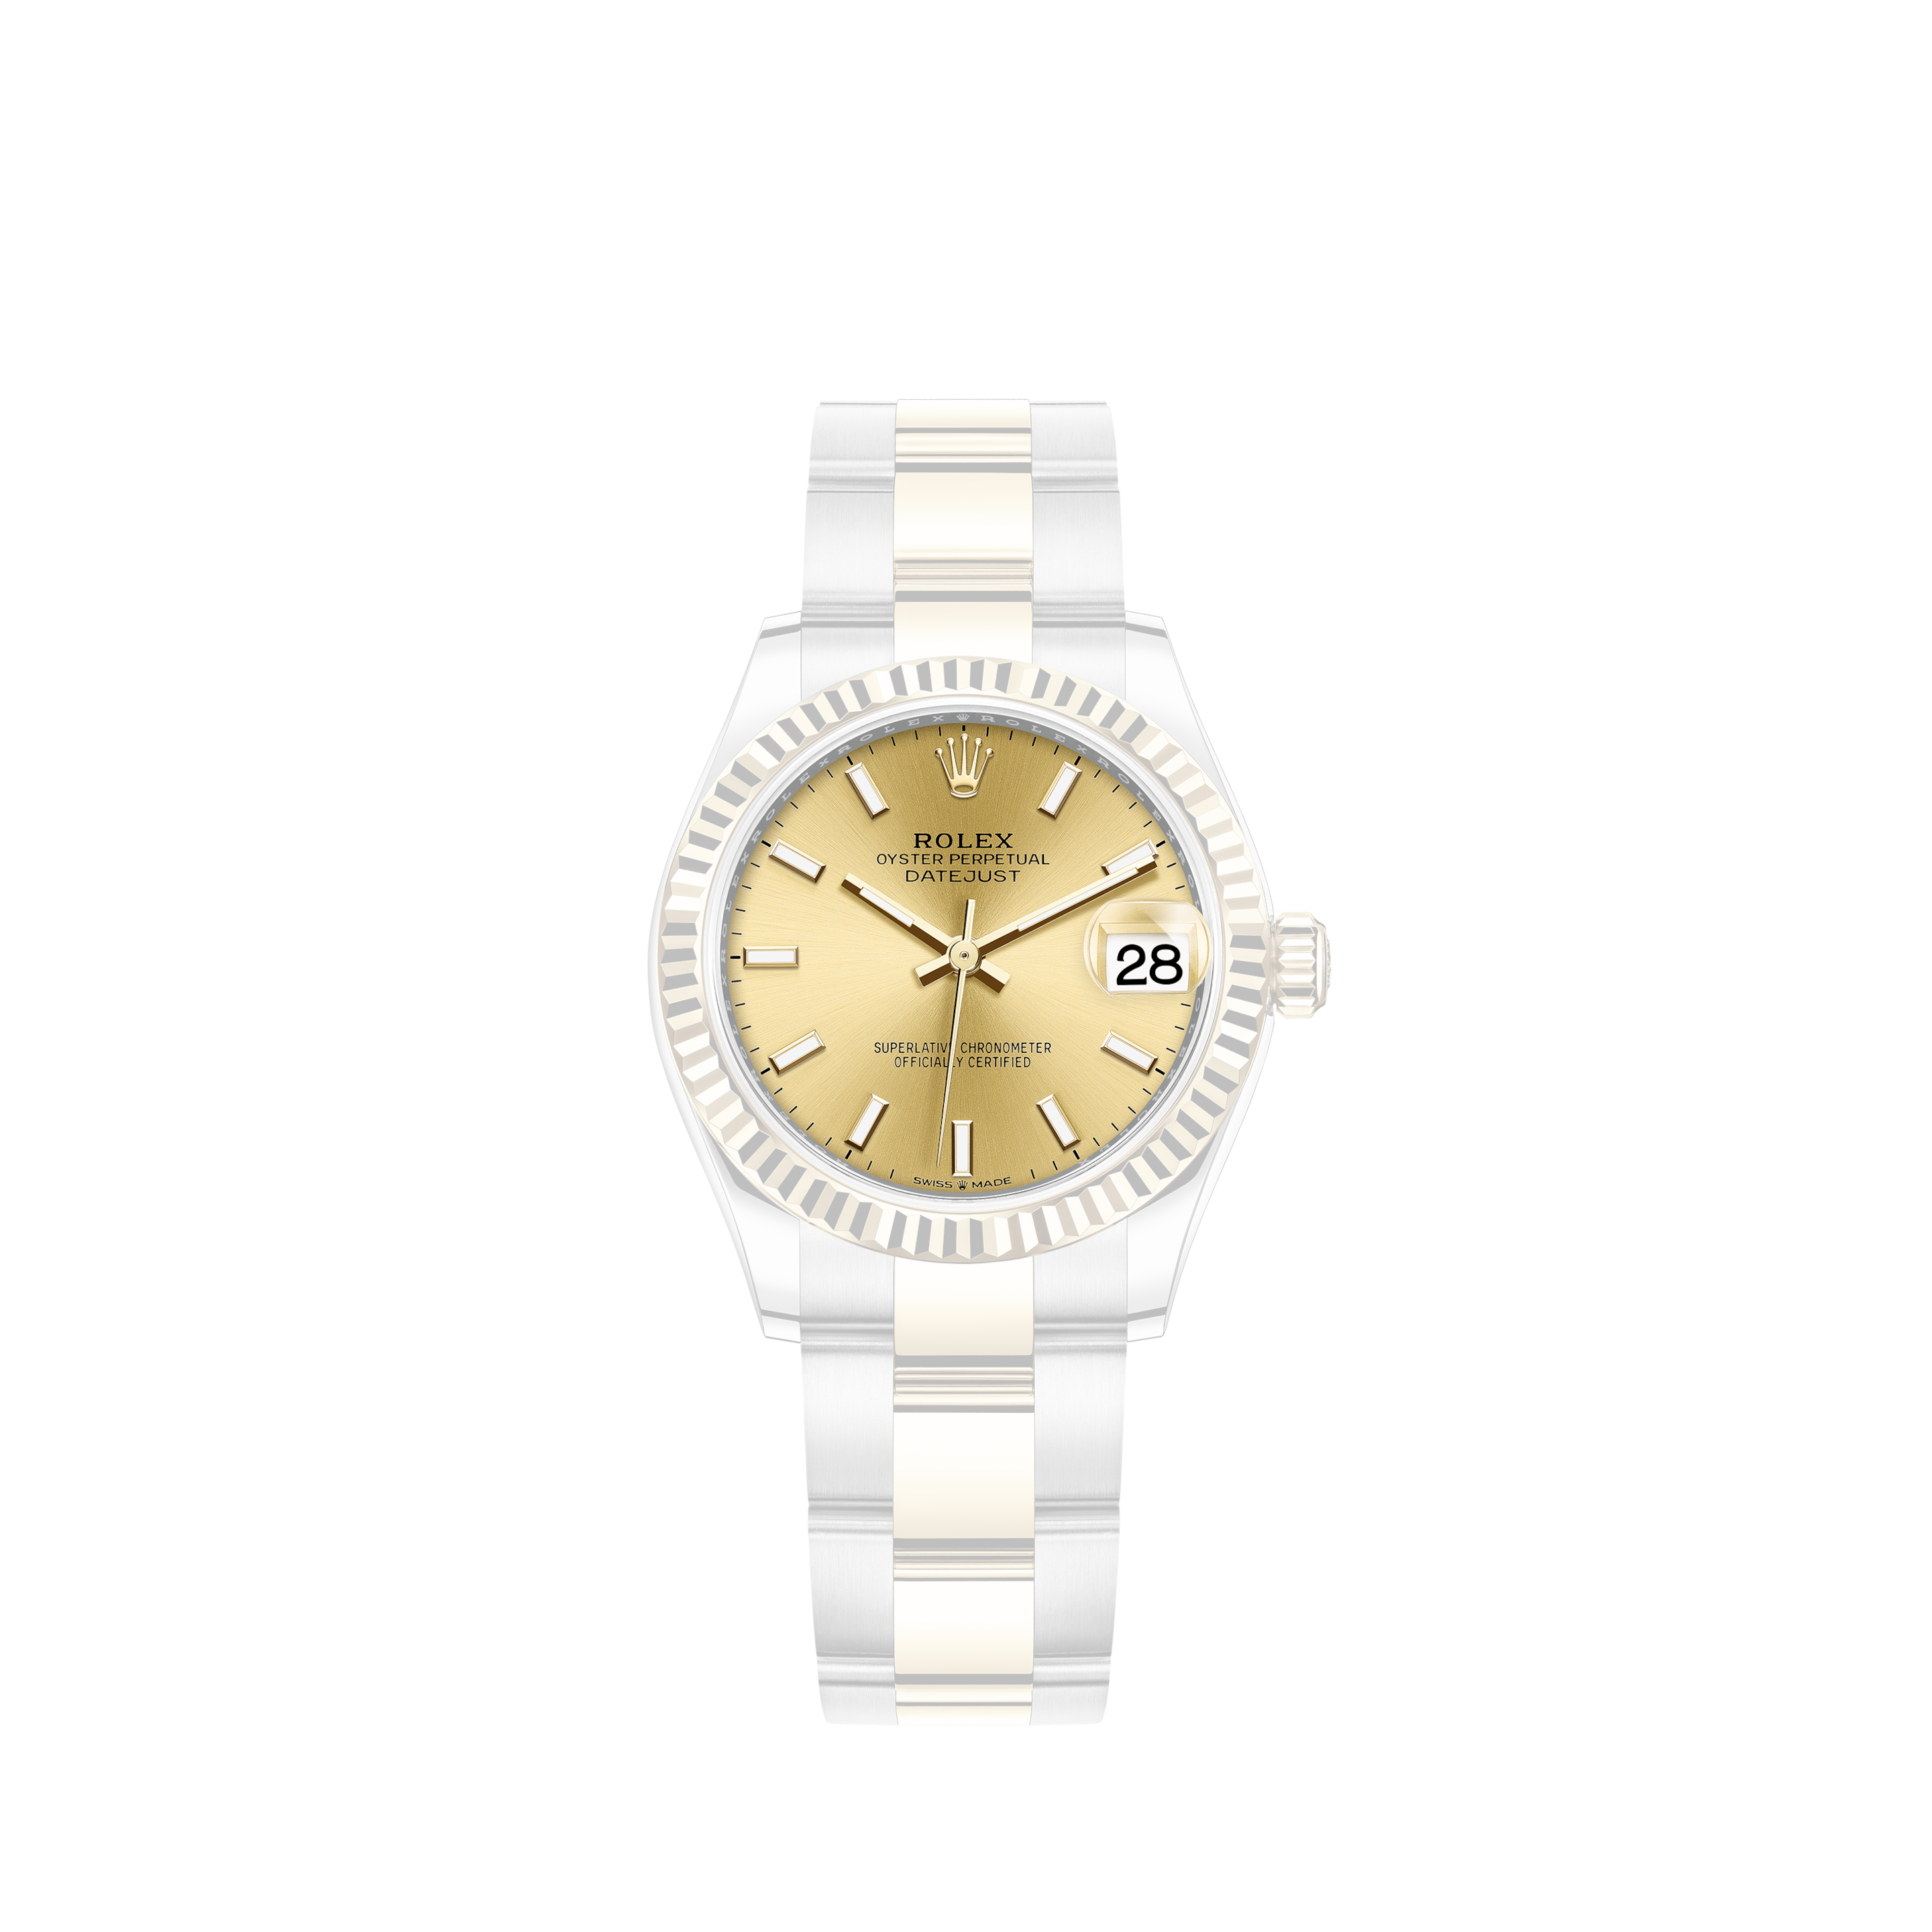 Rolex Emerald and Diamond 31mm Datejust Stainless Steel White Color Jubilee Dial Watch with DiamondsRolex Rubellite grossular Gold oro full set